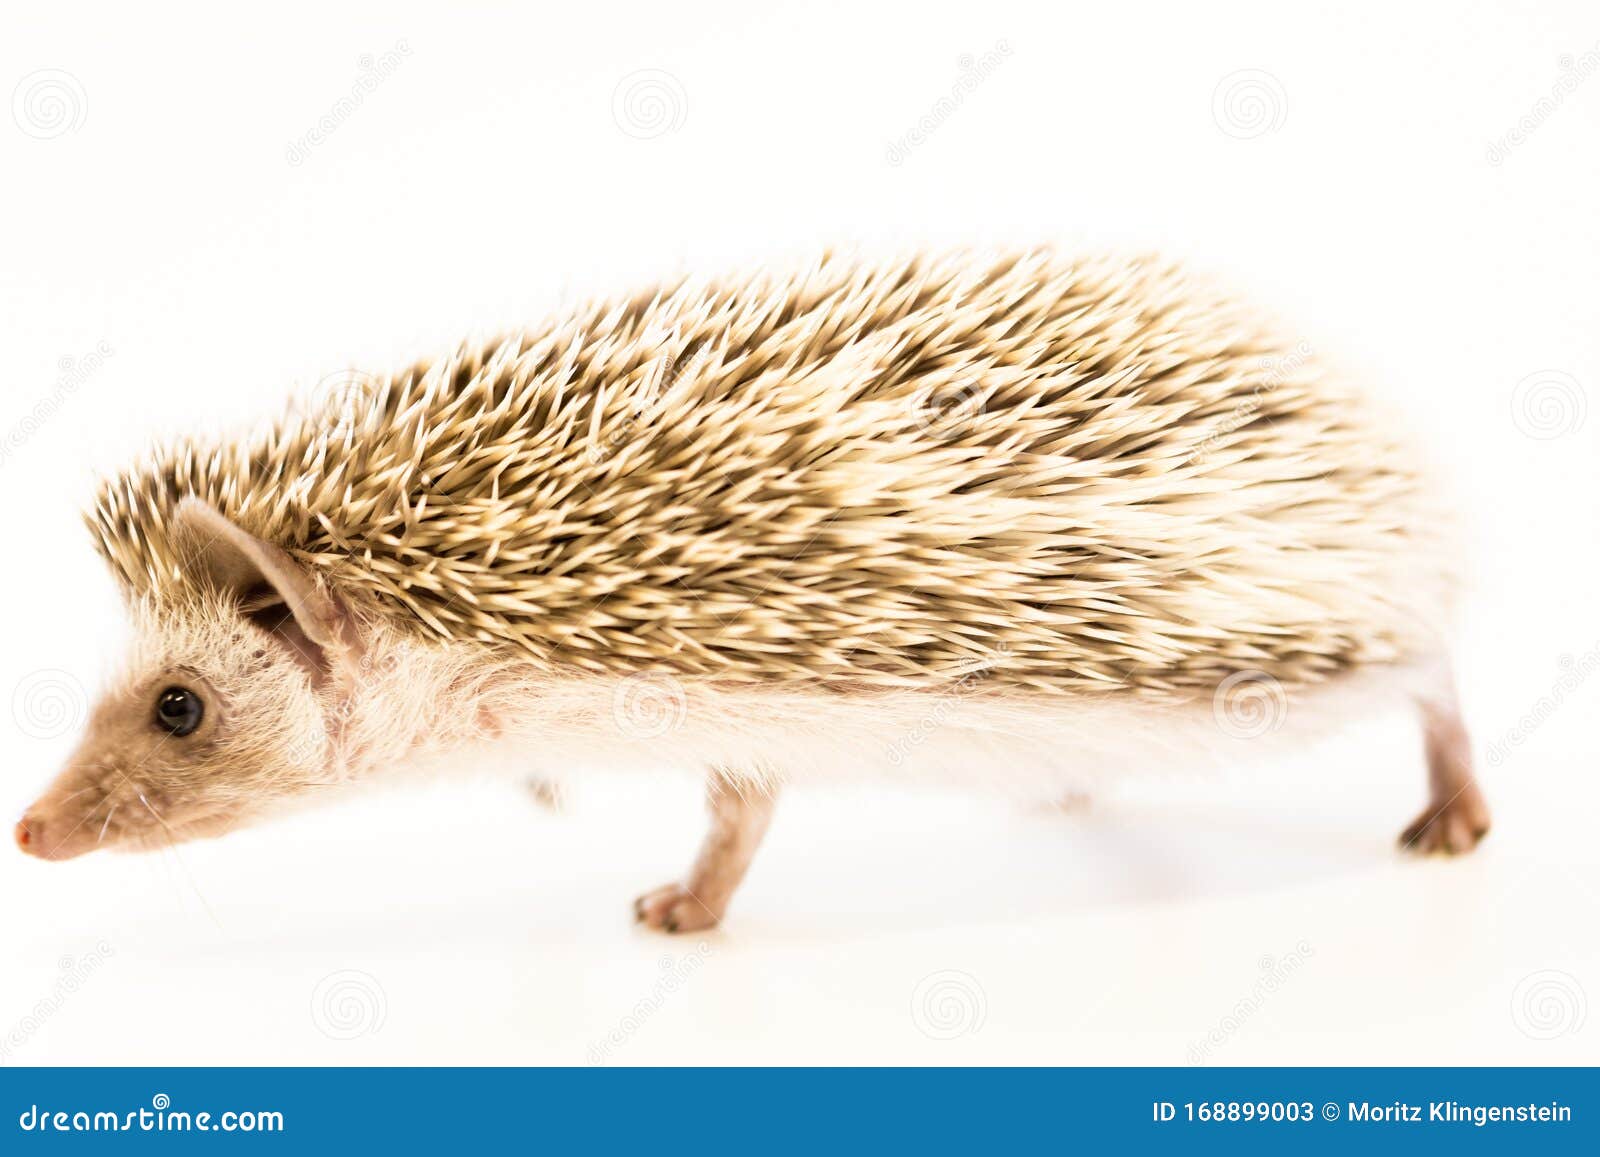 Cute Baby Hedgehog Pet On A White Table Isolated To A White Background Stock Image Image Of Dirty Palm 168899003,Whats The Best Gin On The Market